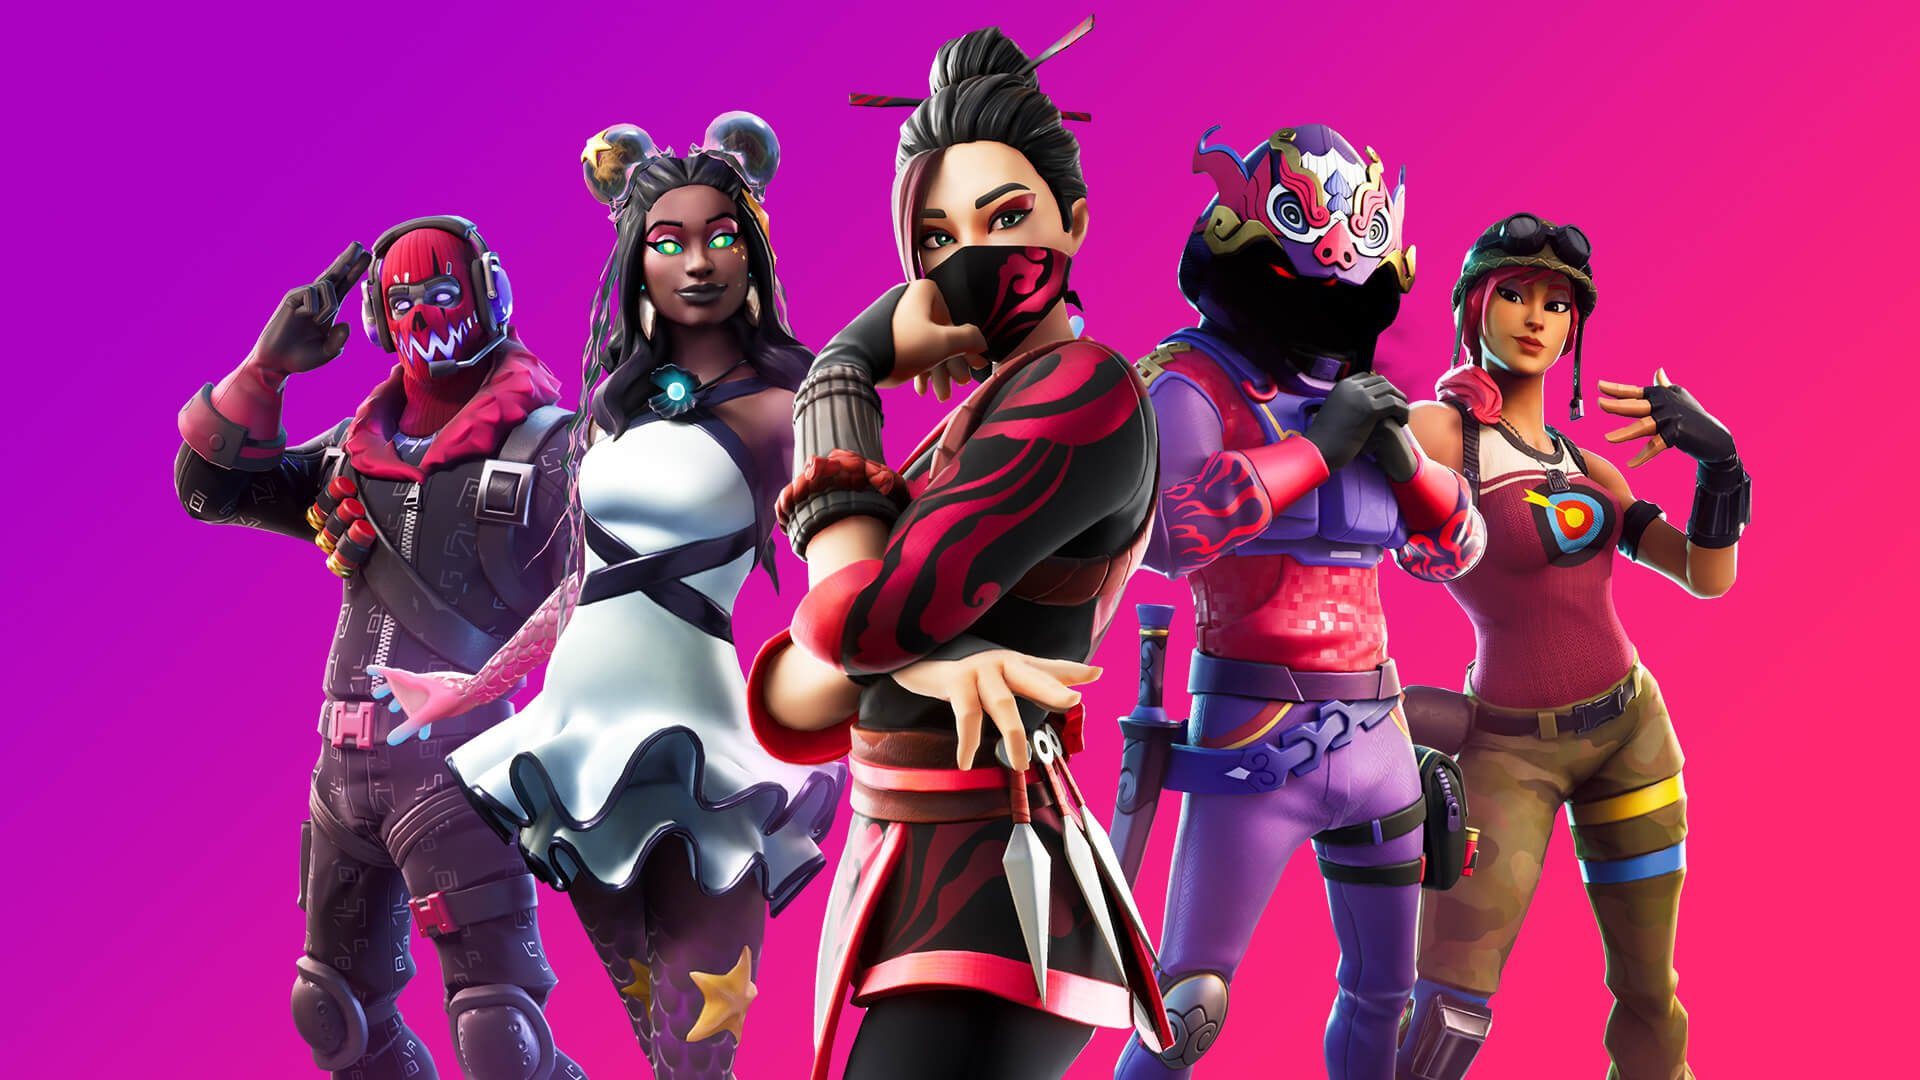 Apple will blacklist 'Fortnite' from App Store for years, says Epic Games  CEO